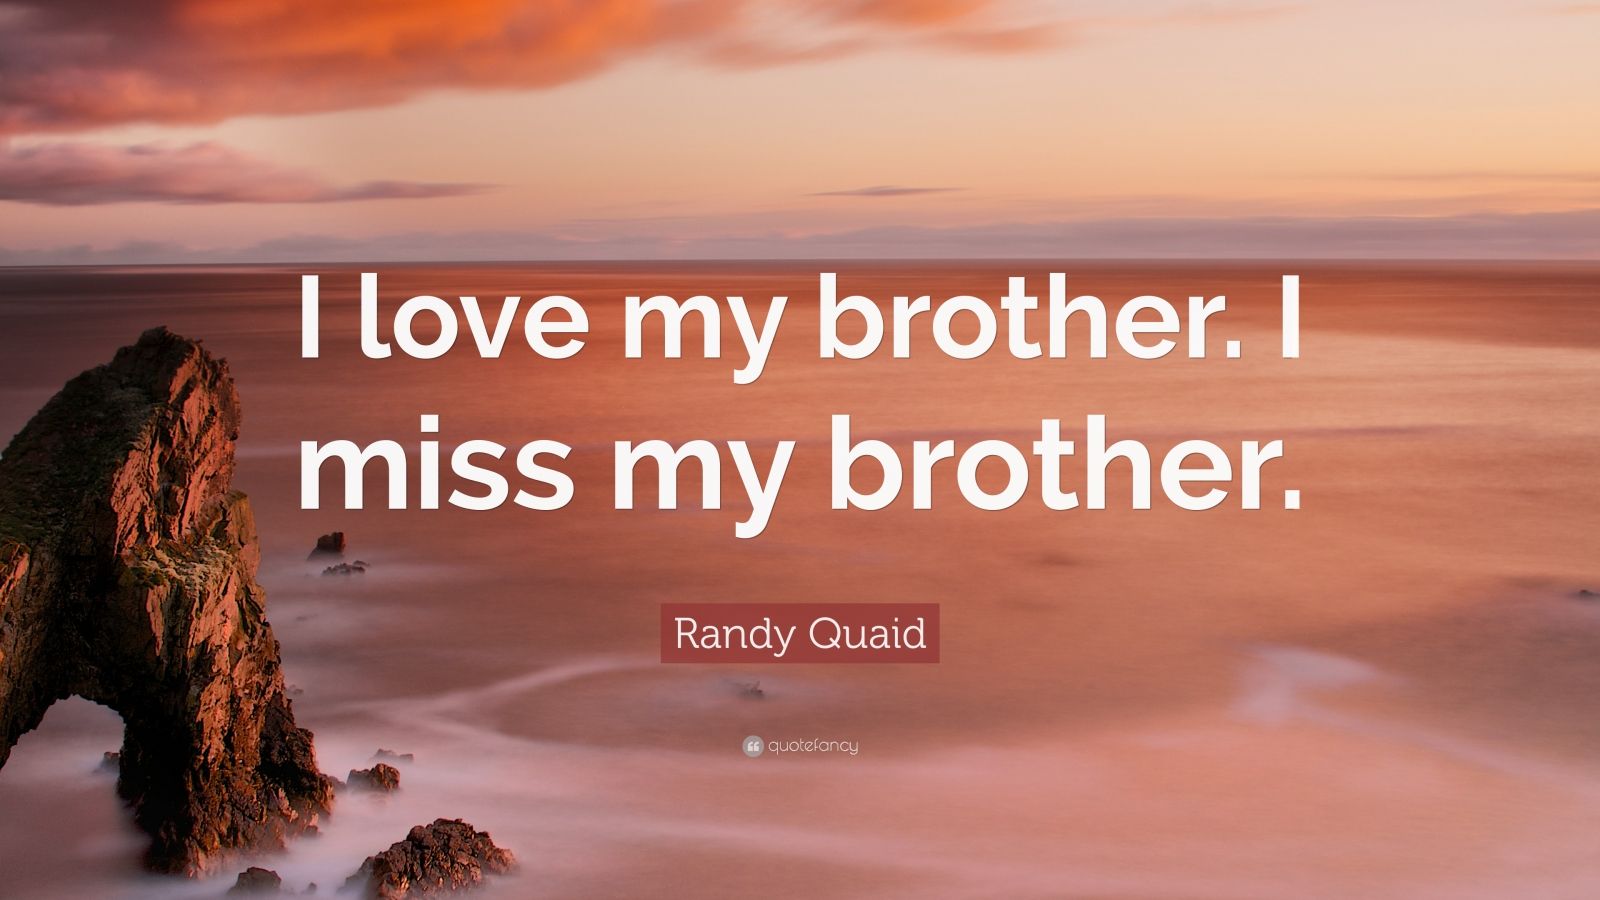 randy-quaid-quote-i-love-my-brother-i-miss-my-brother-9